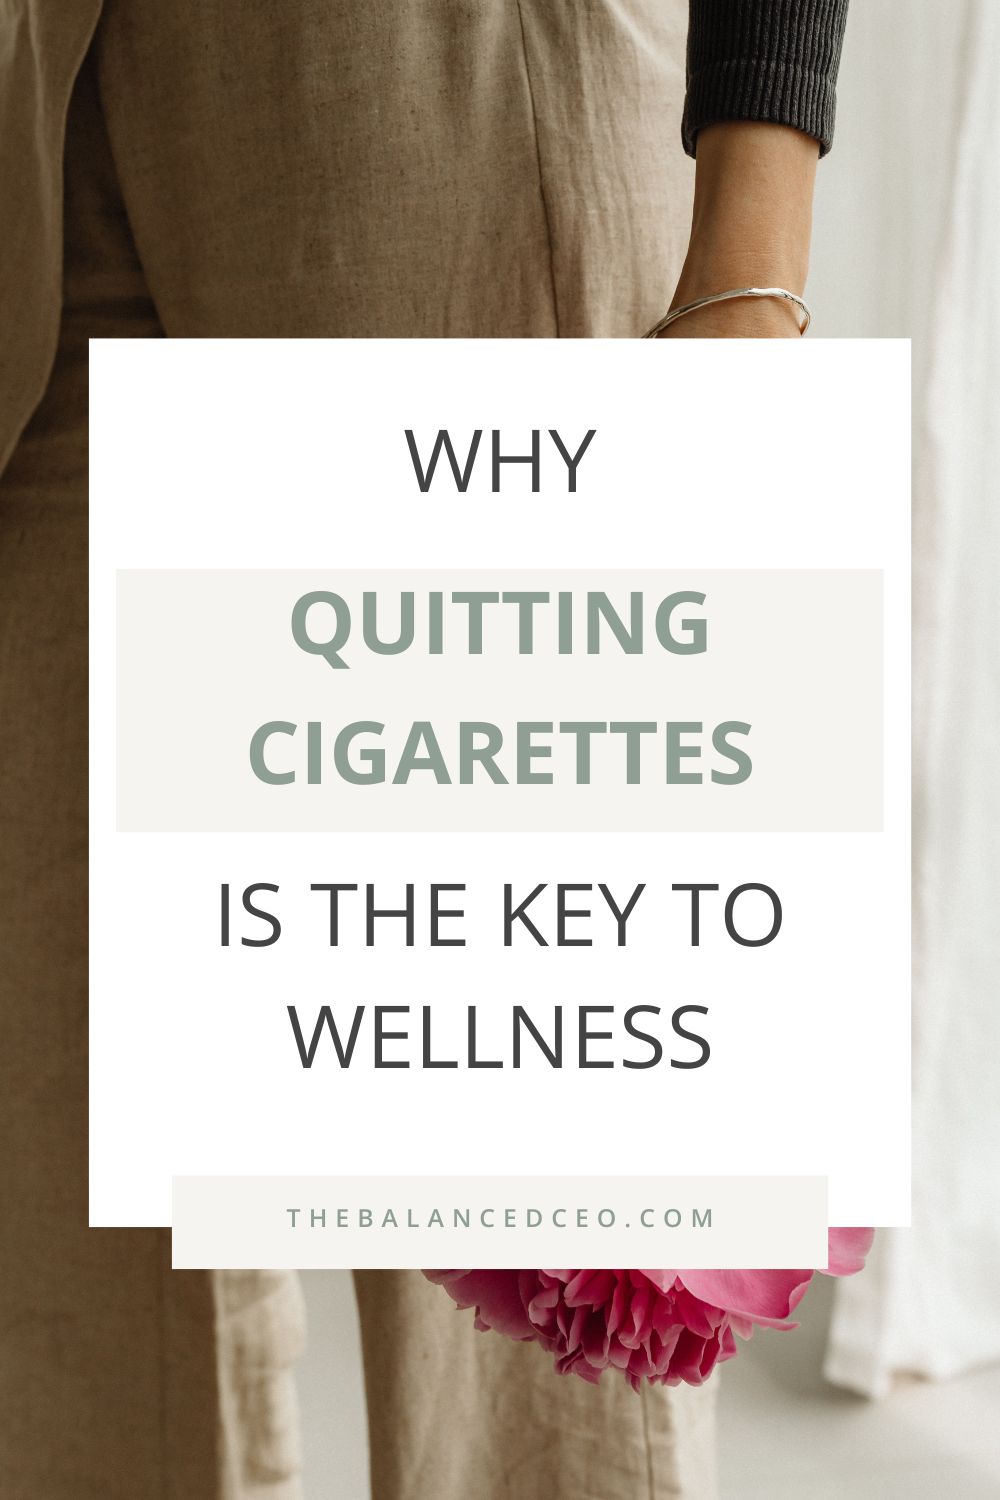 Why Quitting Cigarettes is the Key to Wellness